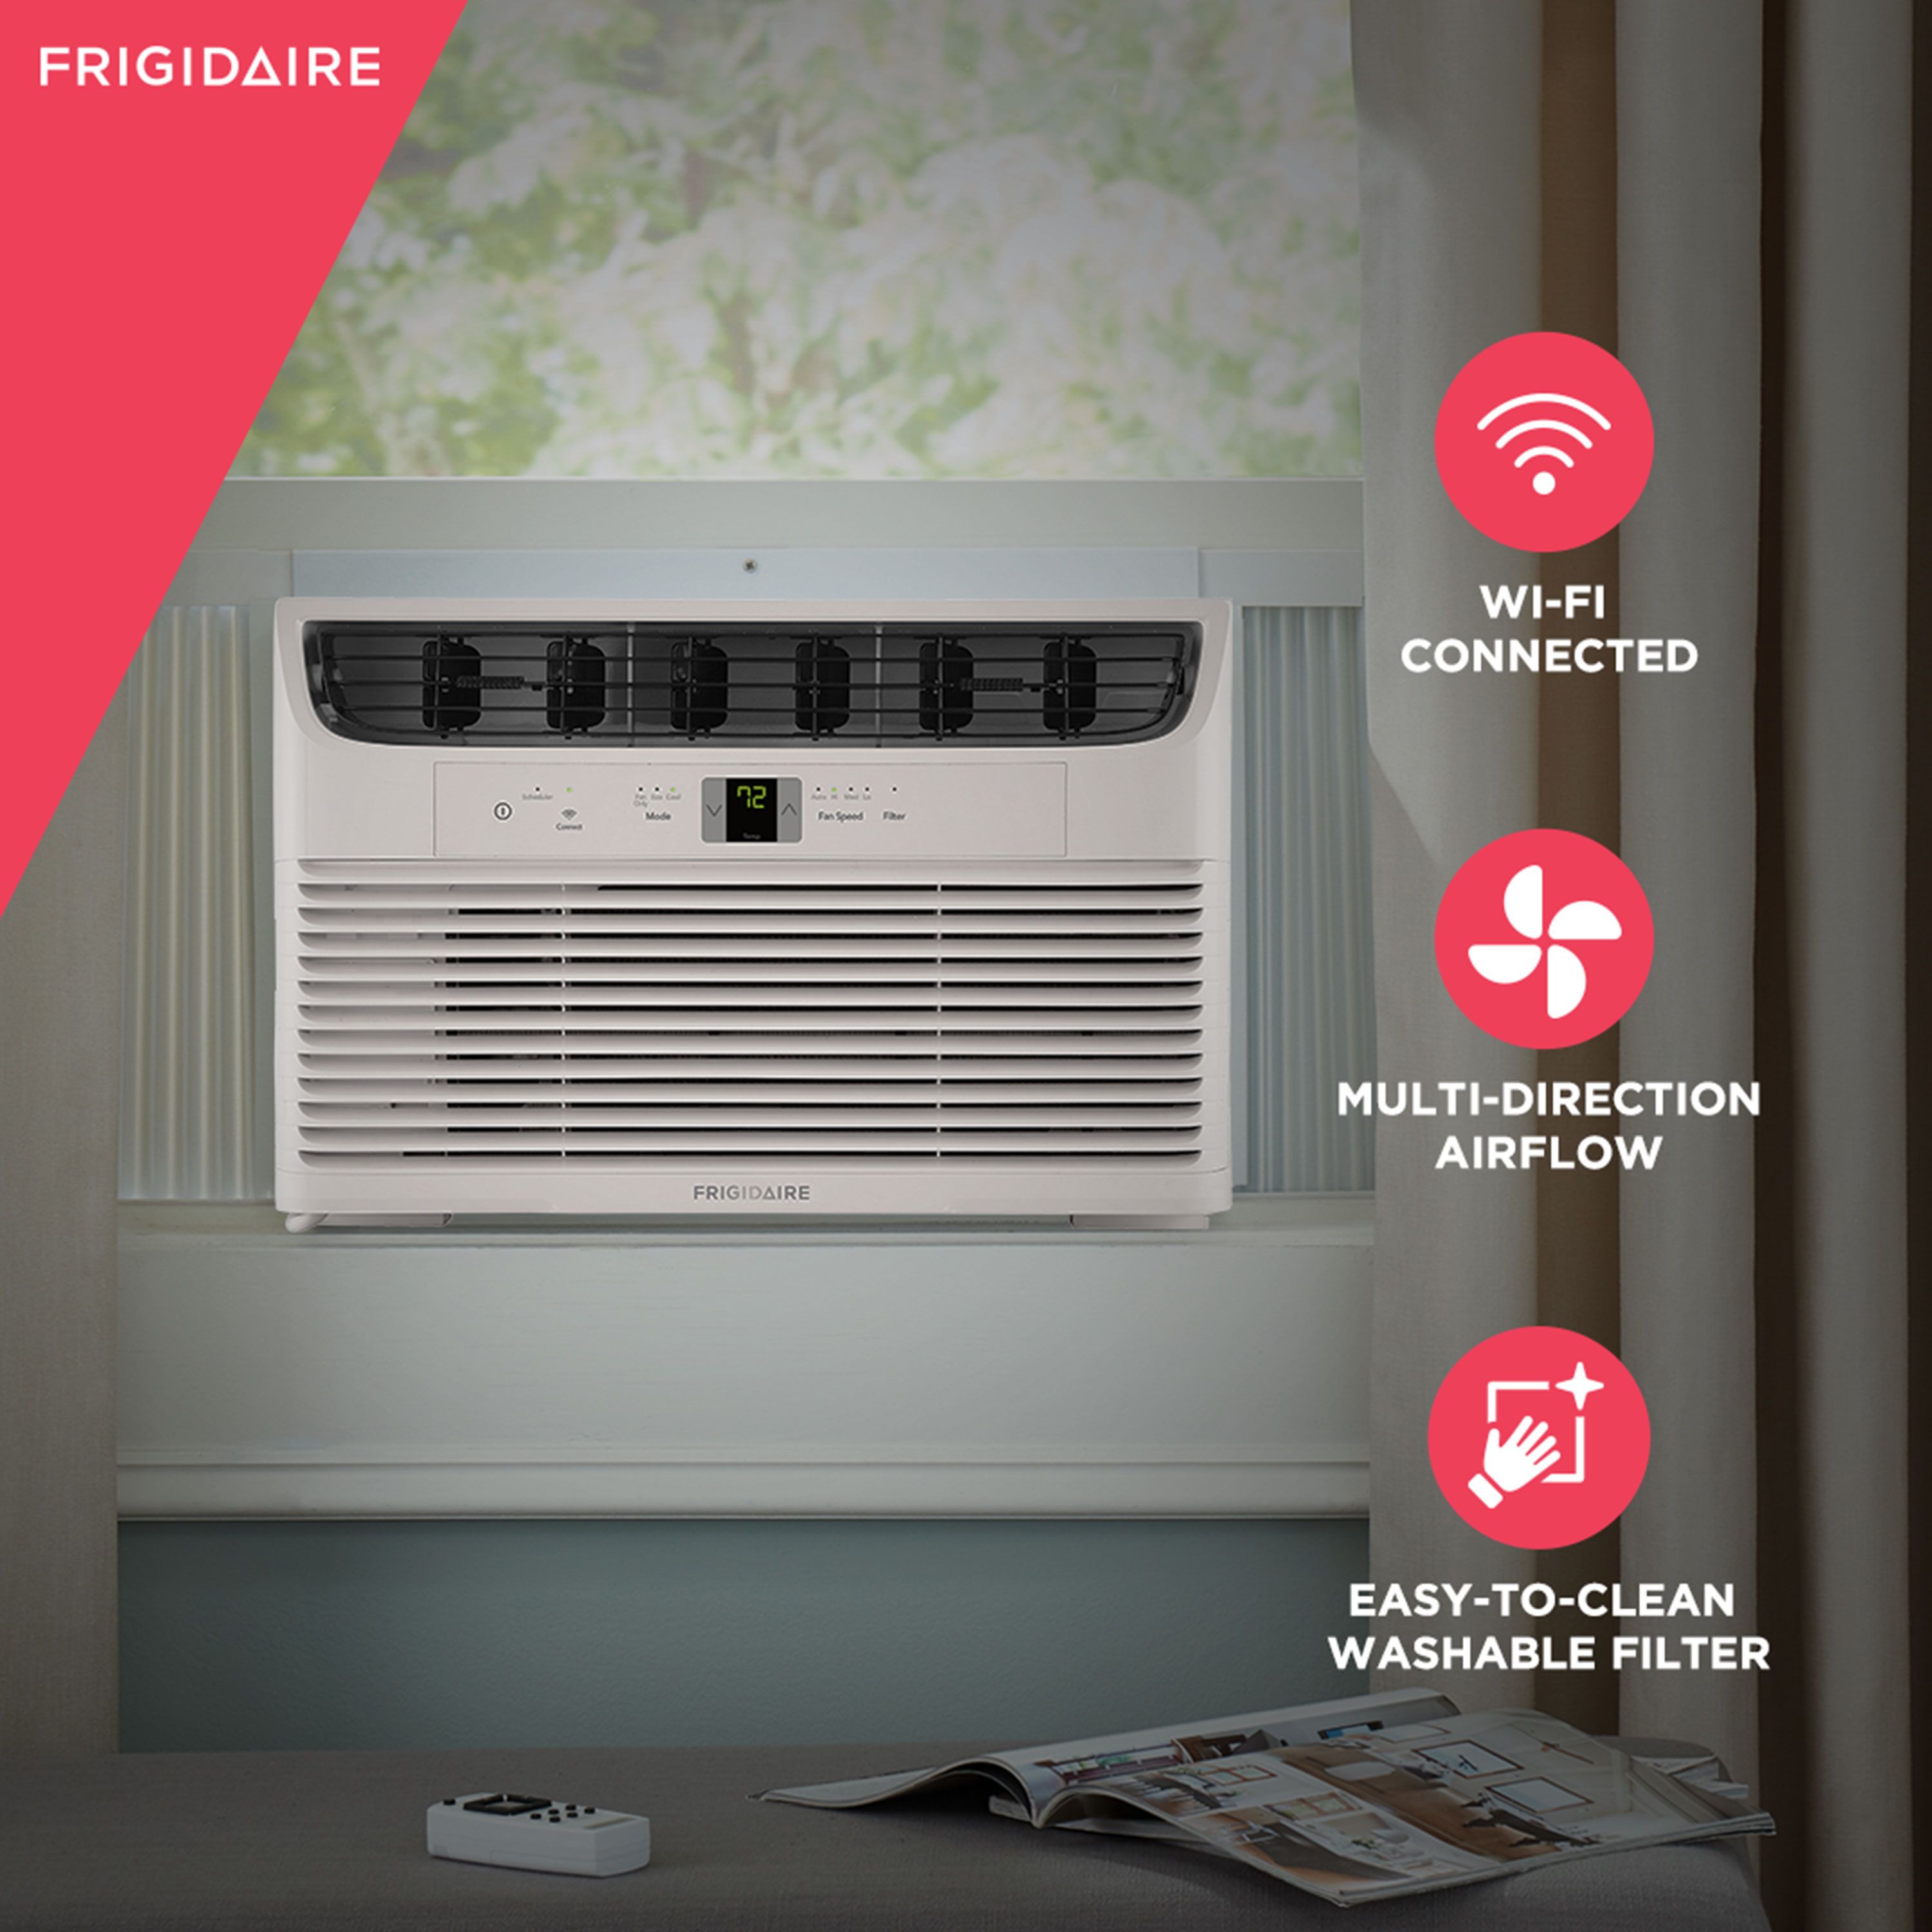 Frigidaire 12,000 BTU 115-Volt Window Air Conditioner with Remote, WIFI, White, FHWW122WCE - image 3 of 3